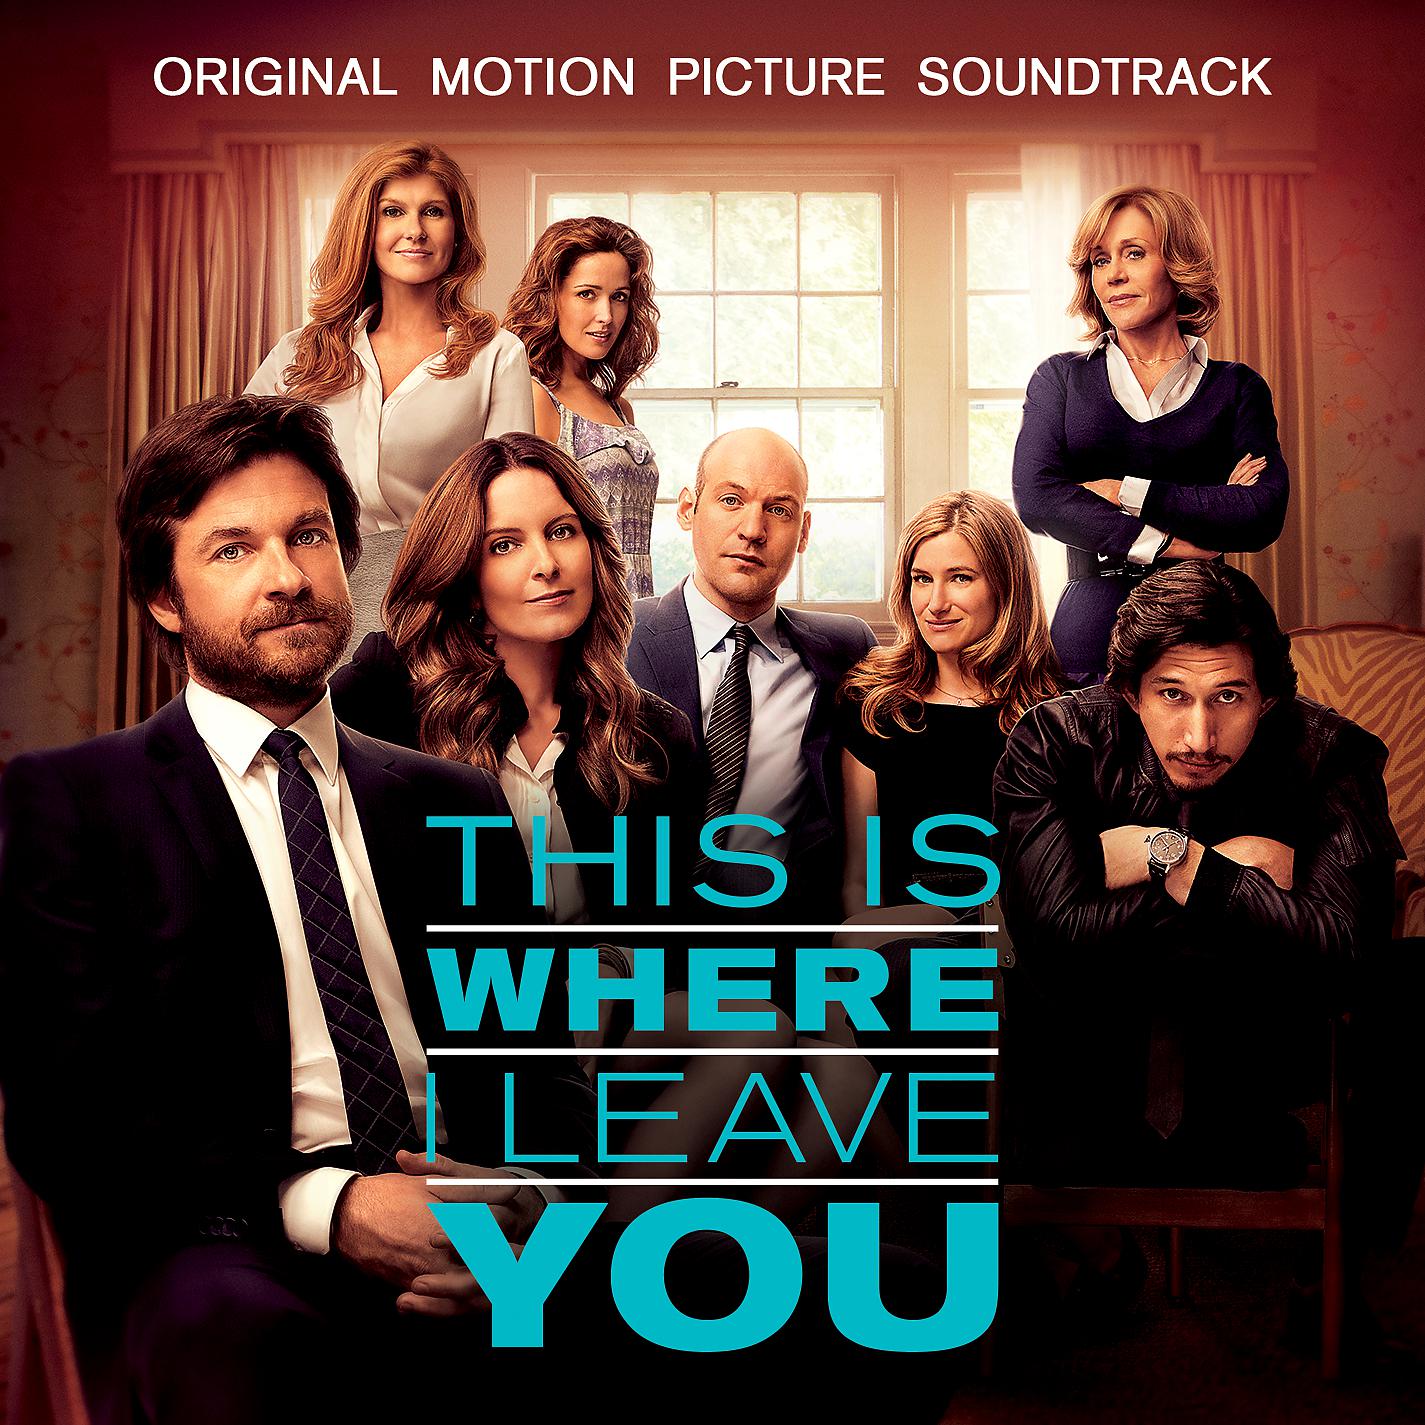 Movie ost. This is where i leave you. Саундтреки. Leave you. Саундтреки к фильмам.